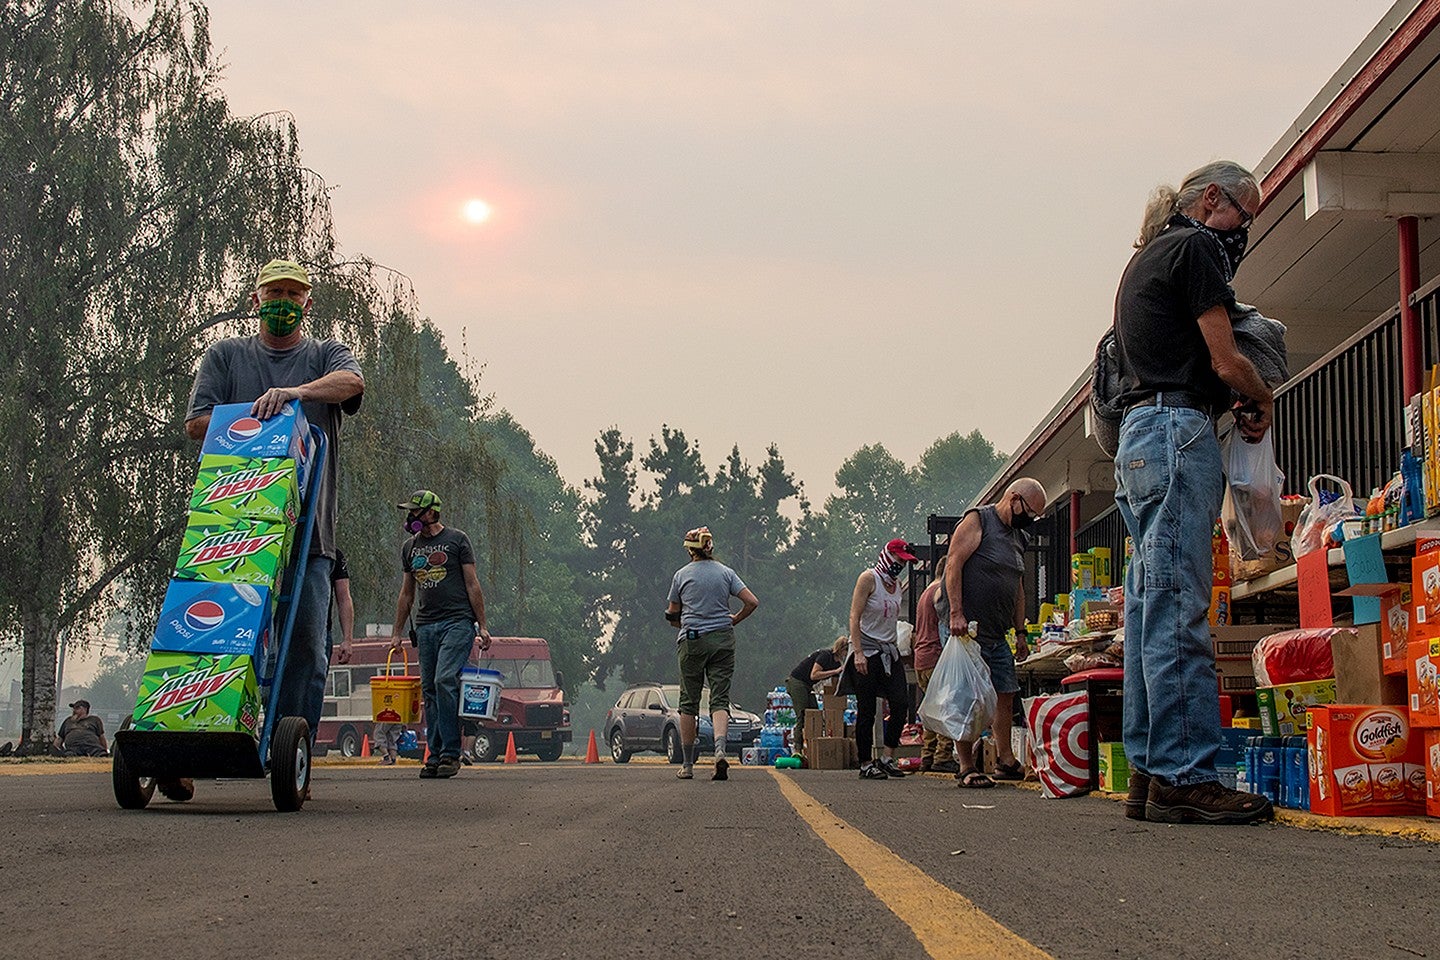 Volunteers help organize supplies donated to support those affected by the Holiday Farm Fire in central Oregon in September 2020. Photo courtesy of Payton Bruni.